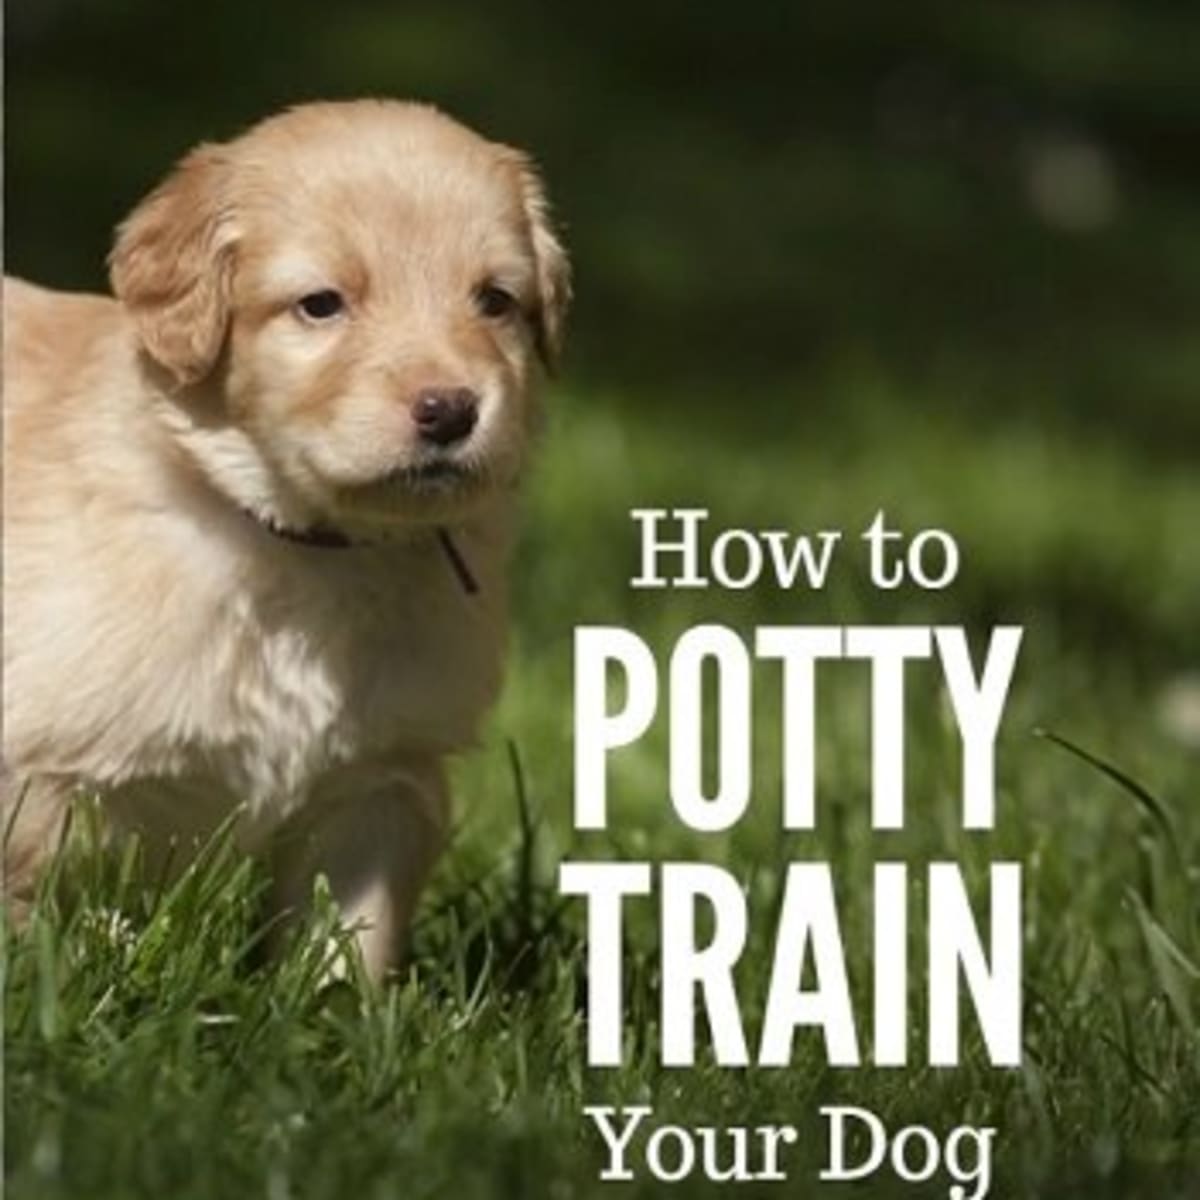 The Best Way to Potty Train a Puppy - The Honest Kitchen Blog